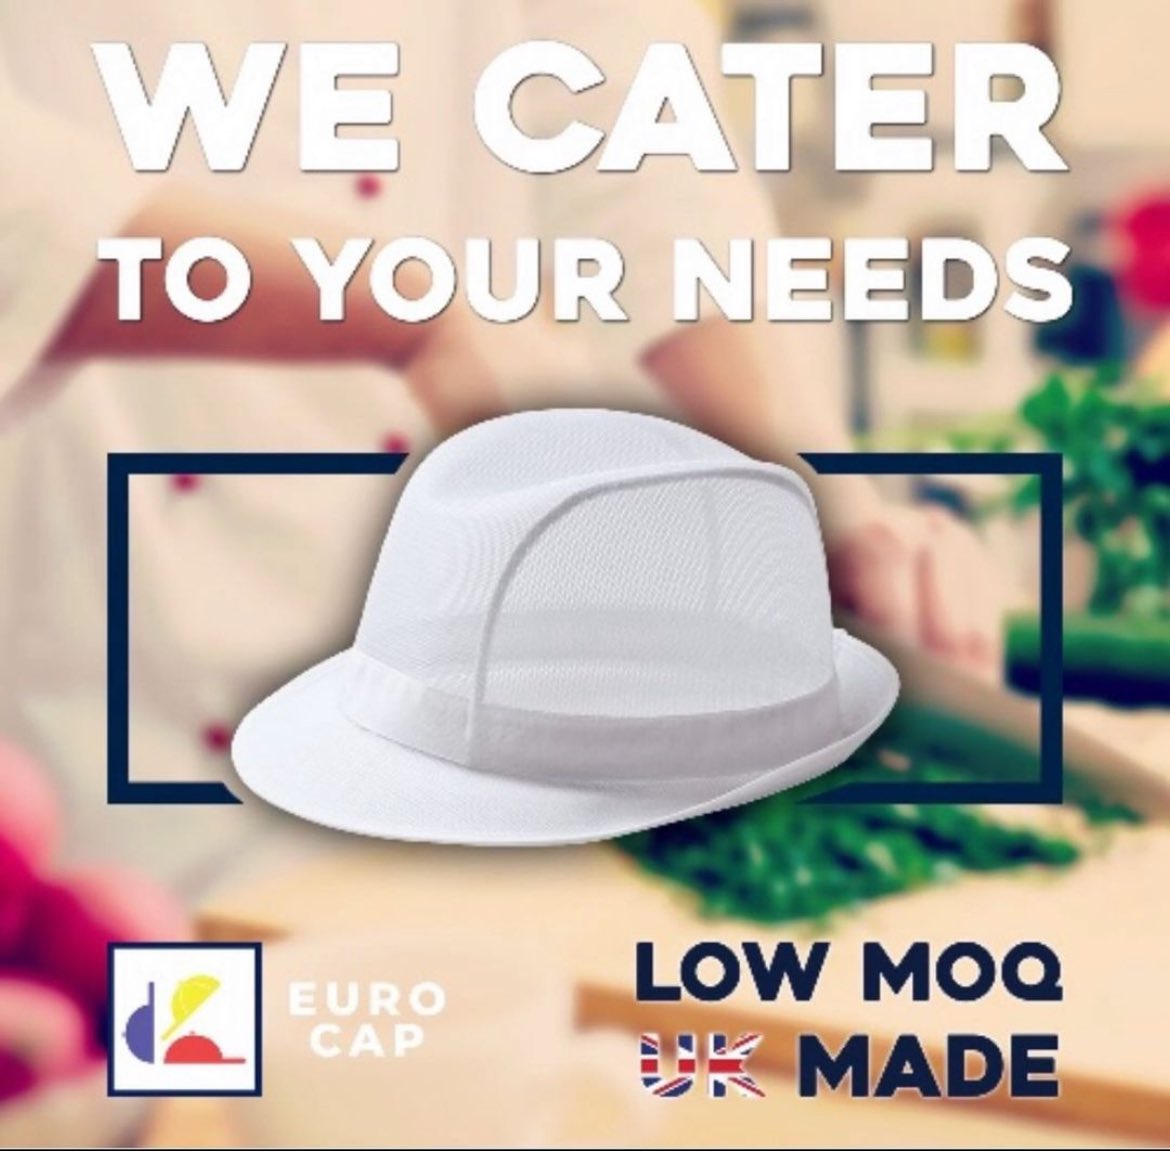 We Cater To Your Needs! Made in the UK, with 24 minimum order! Available to order now! #ukproducer #ukproducts #lowminimums #lowminimumorder #madeinuk #madeinengland #madeinyorkshire #hats #cater